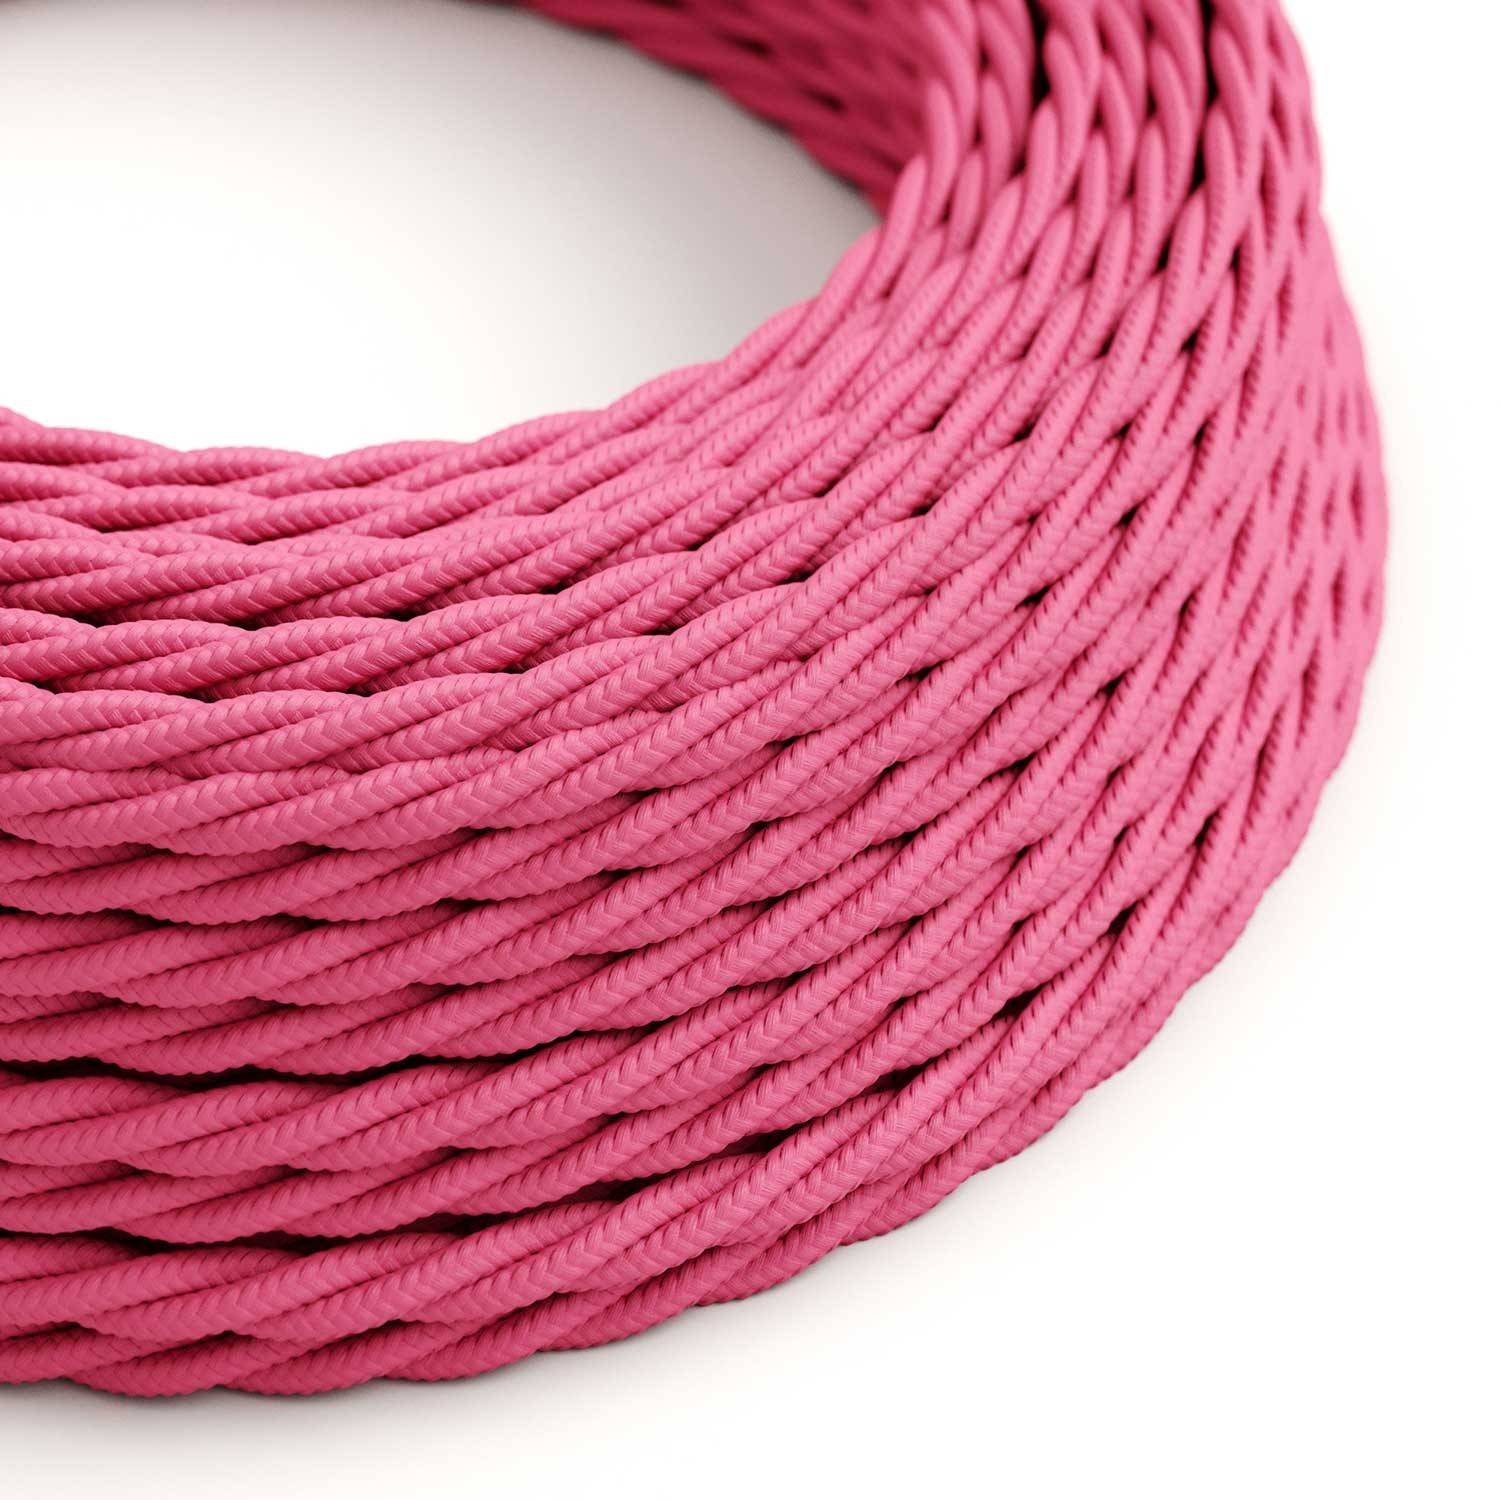 Glossy Pink Fuchsia Textile Cable - The Original Creative-Cables - TM08 braided 2x0.75mm / 3x0.75mm